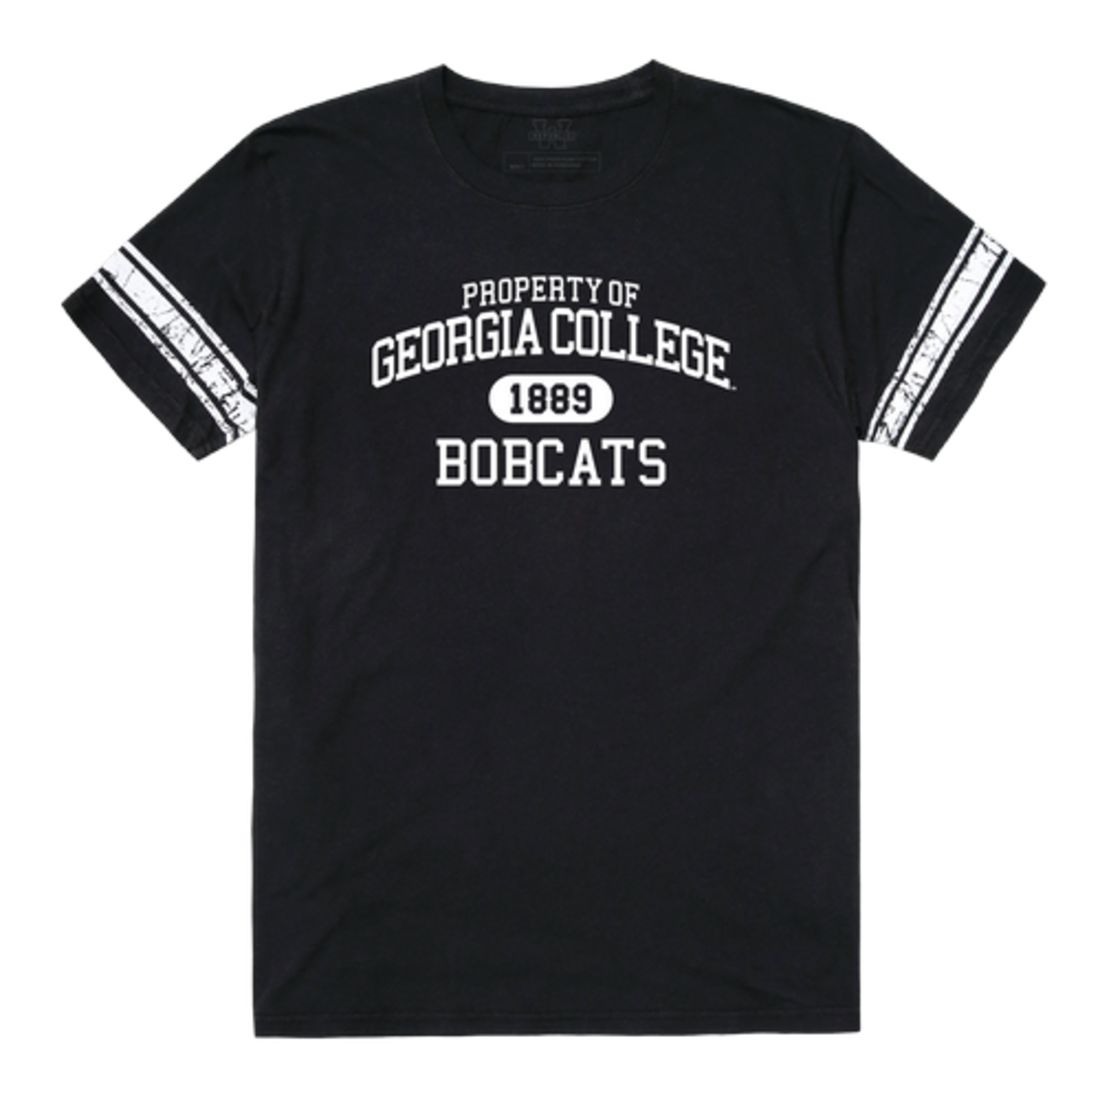 Georgia College and State University Bobcats Property Football T-Shirt Tee